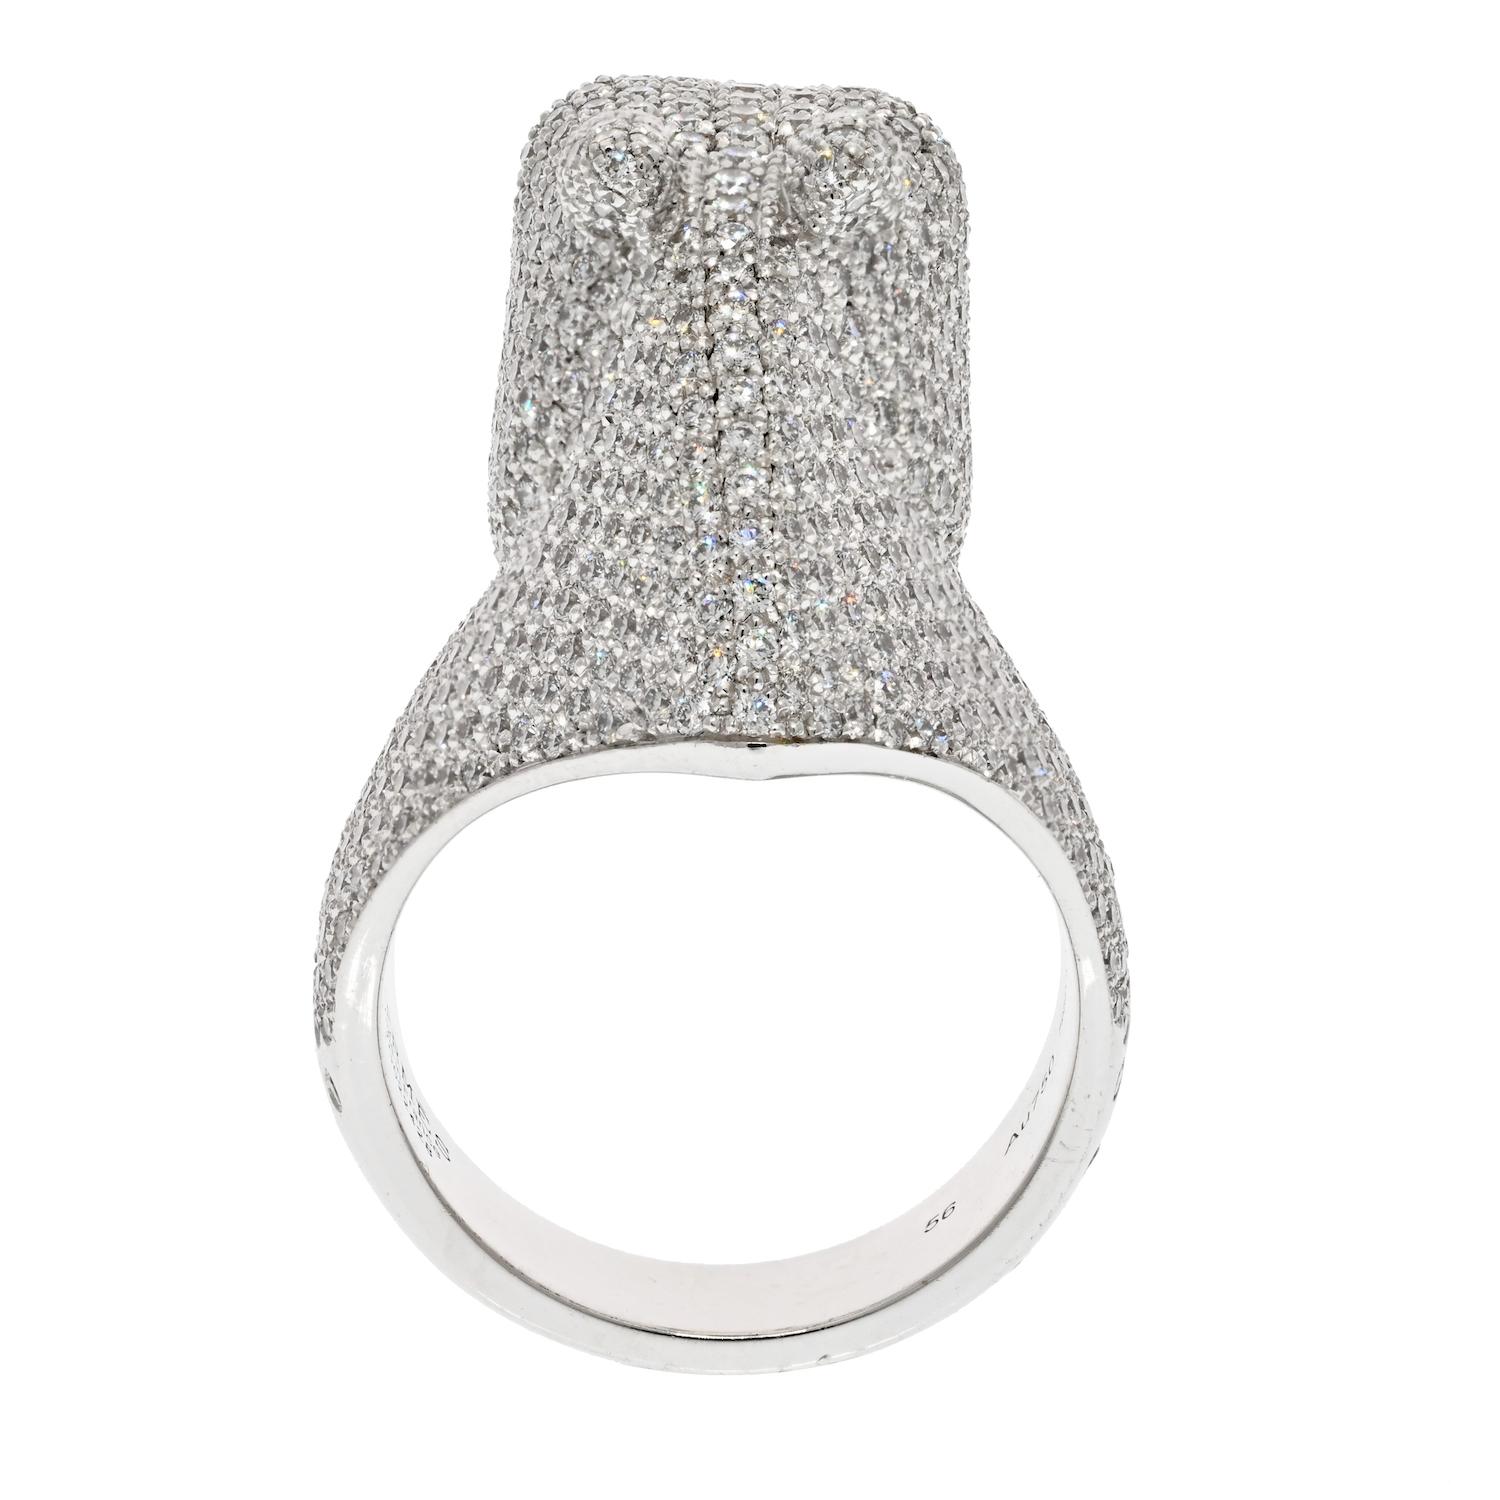 Hermes 18k white gold ring designed as a band from which a horse head protrudes; the band and the horse head set with numerous round diamonds.

Pierre Hardy designed Galop as a tribute to Hermès' very first creations, horse harnesses, bridles, and